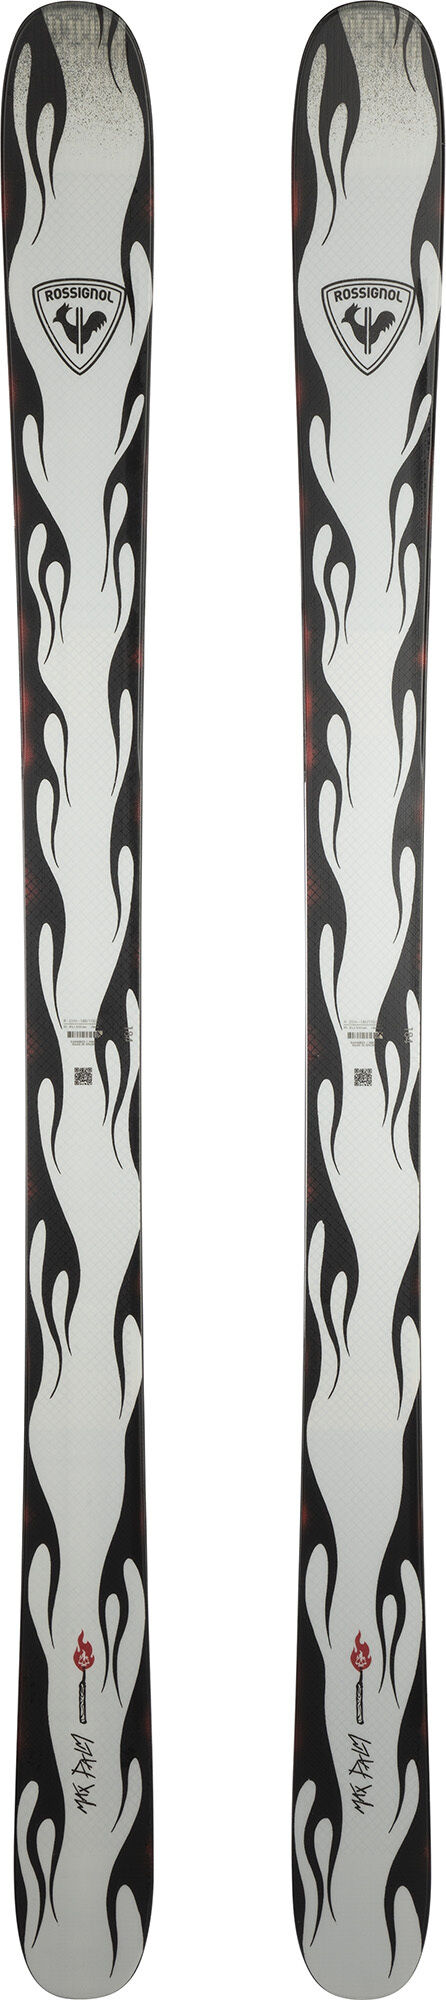 Alpine skis and equipment: skis, bindings and poles | Rossignol